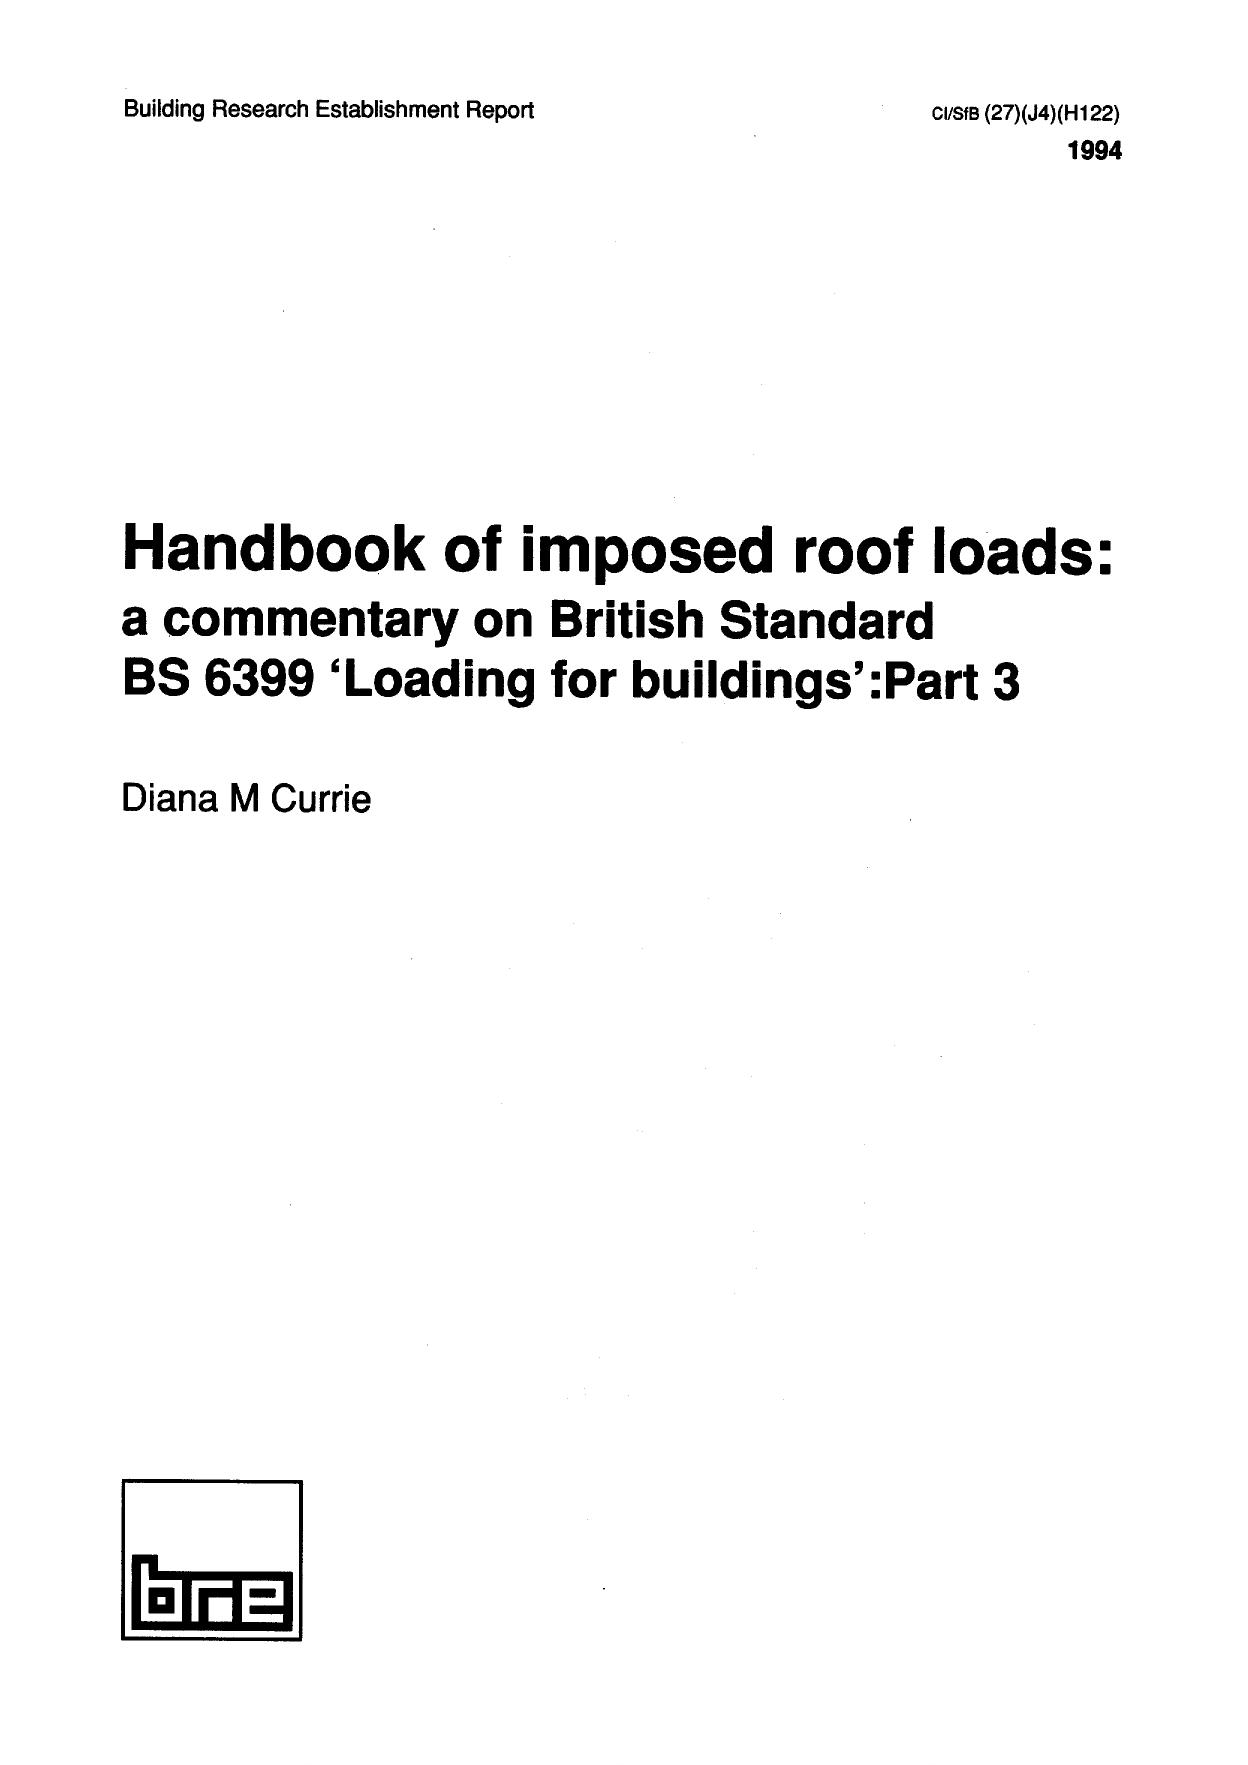 Handbook of imposed roof loads- a commentary on British Stan